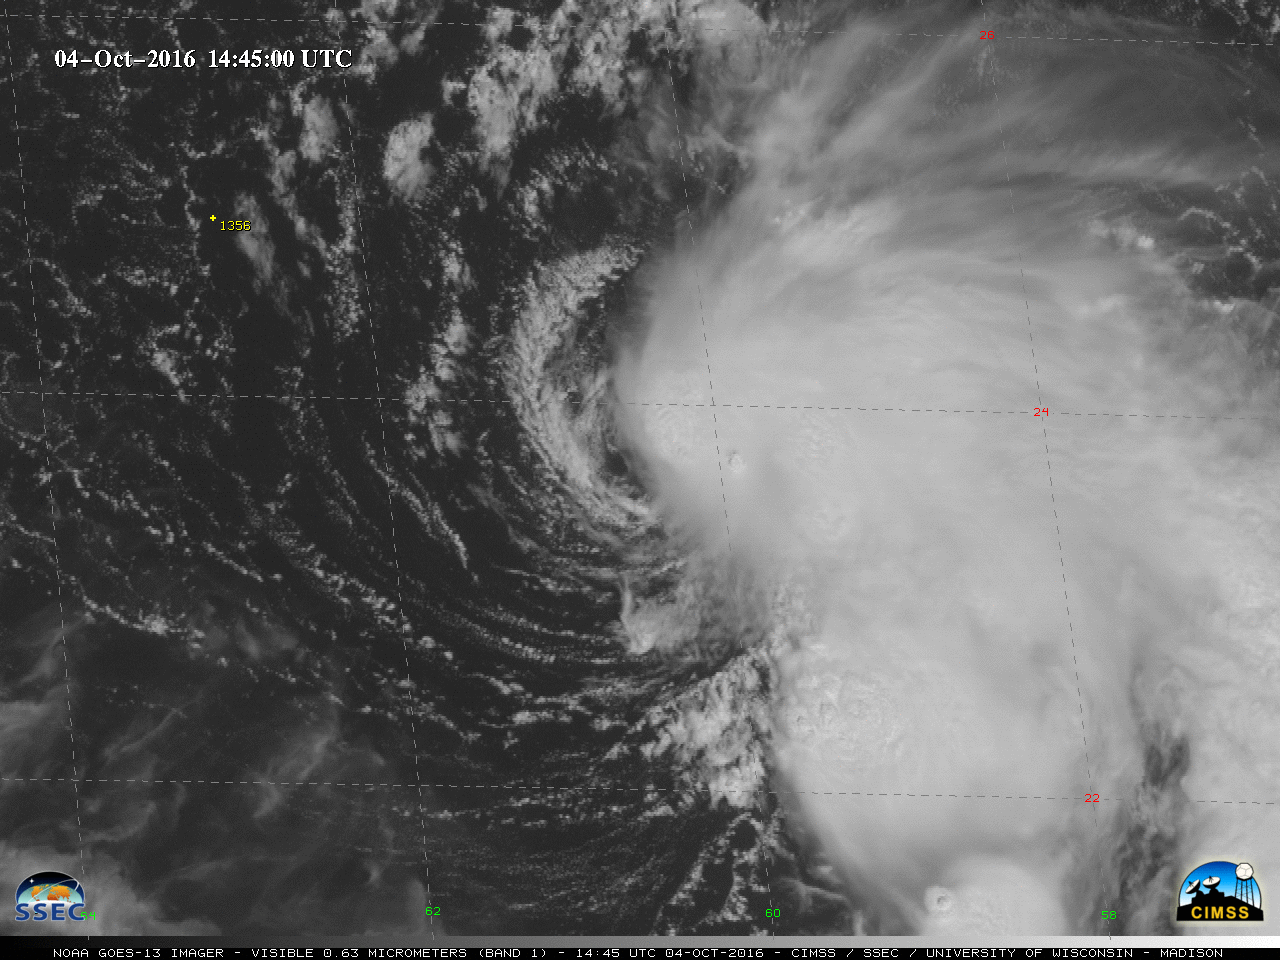 GOES-13 Visible (0.63 um) images [click to play animation]